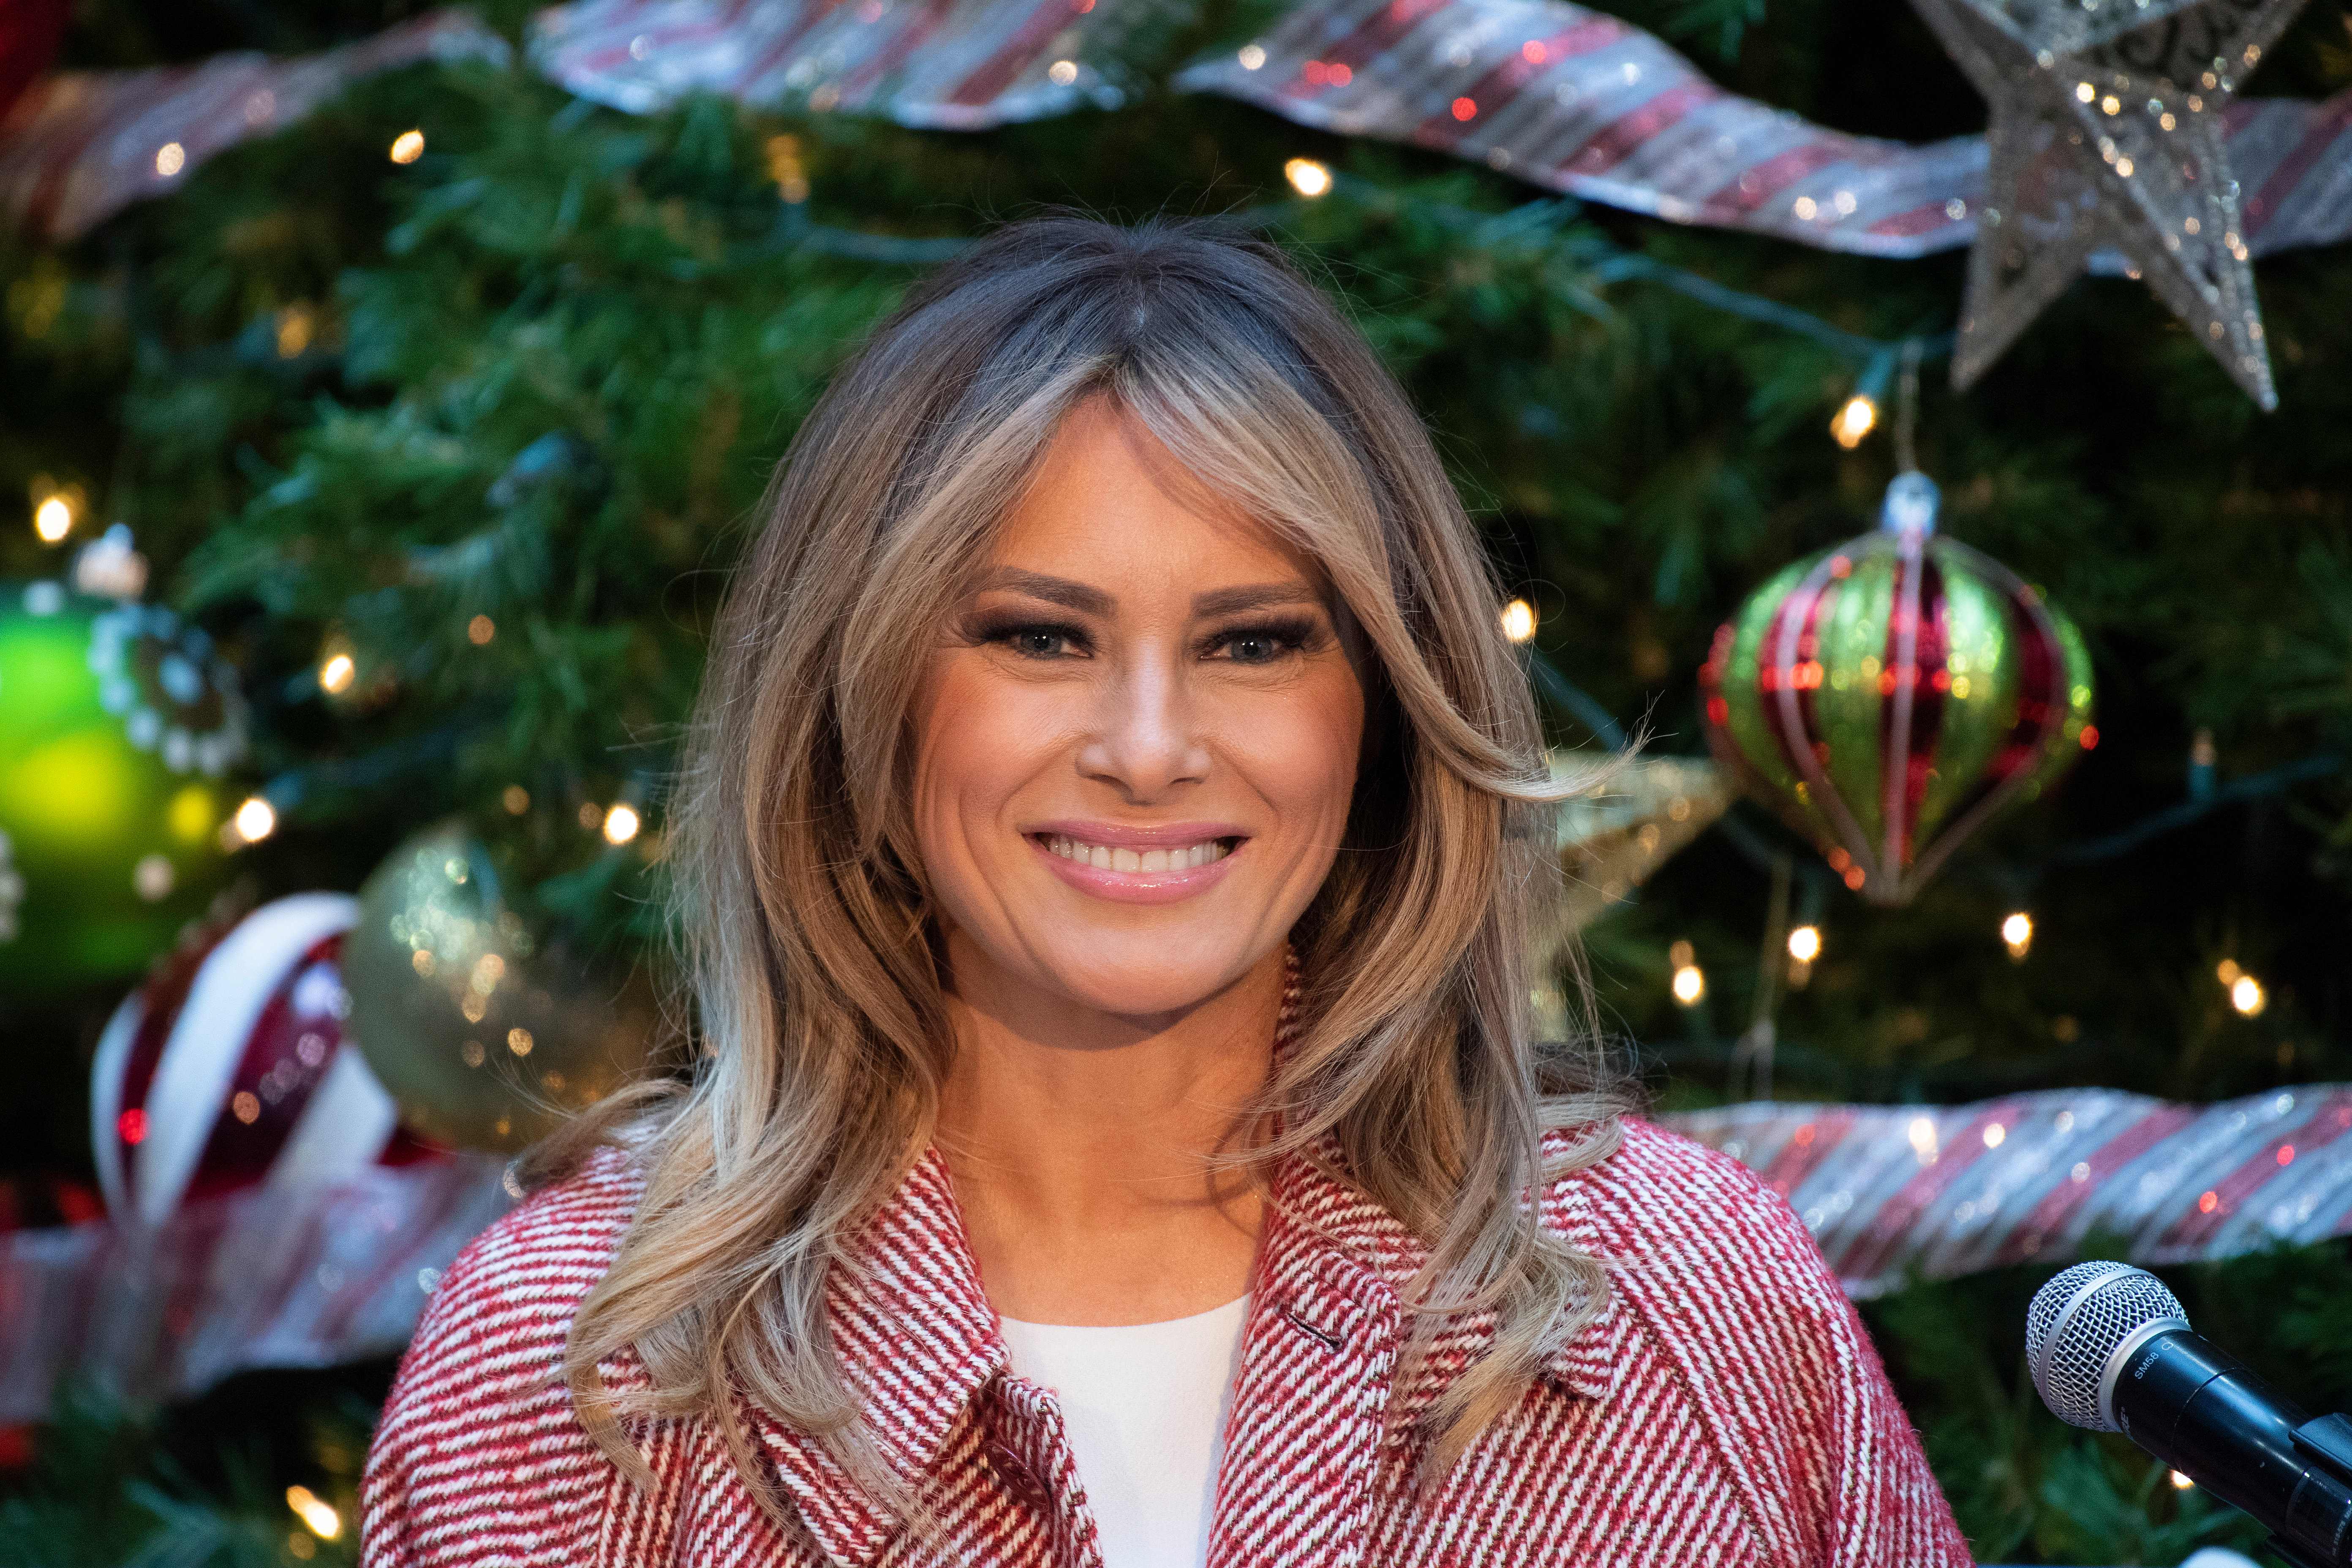 US First Lady Melania Trump reads the book "Oliver the Ornament" as she visits children at Children's National Hospital in Washington, DC, on December 13, 2018. (Photo by JIM WATSON/AFP/Getty Images)